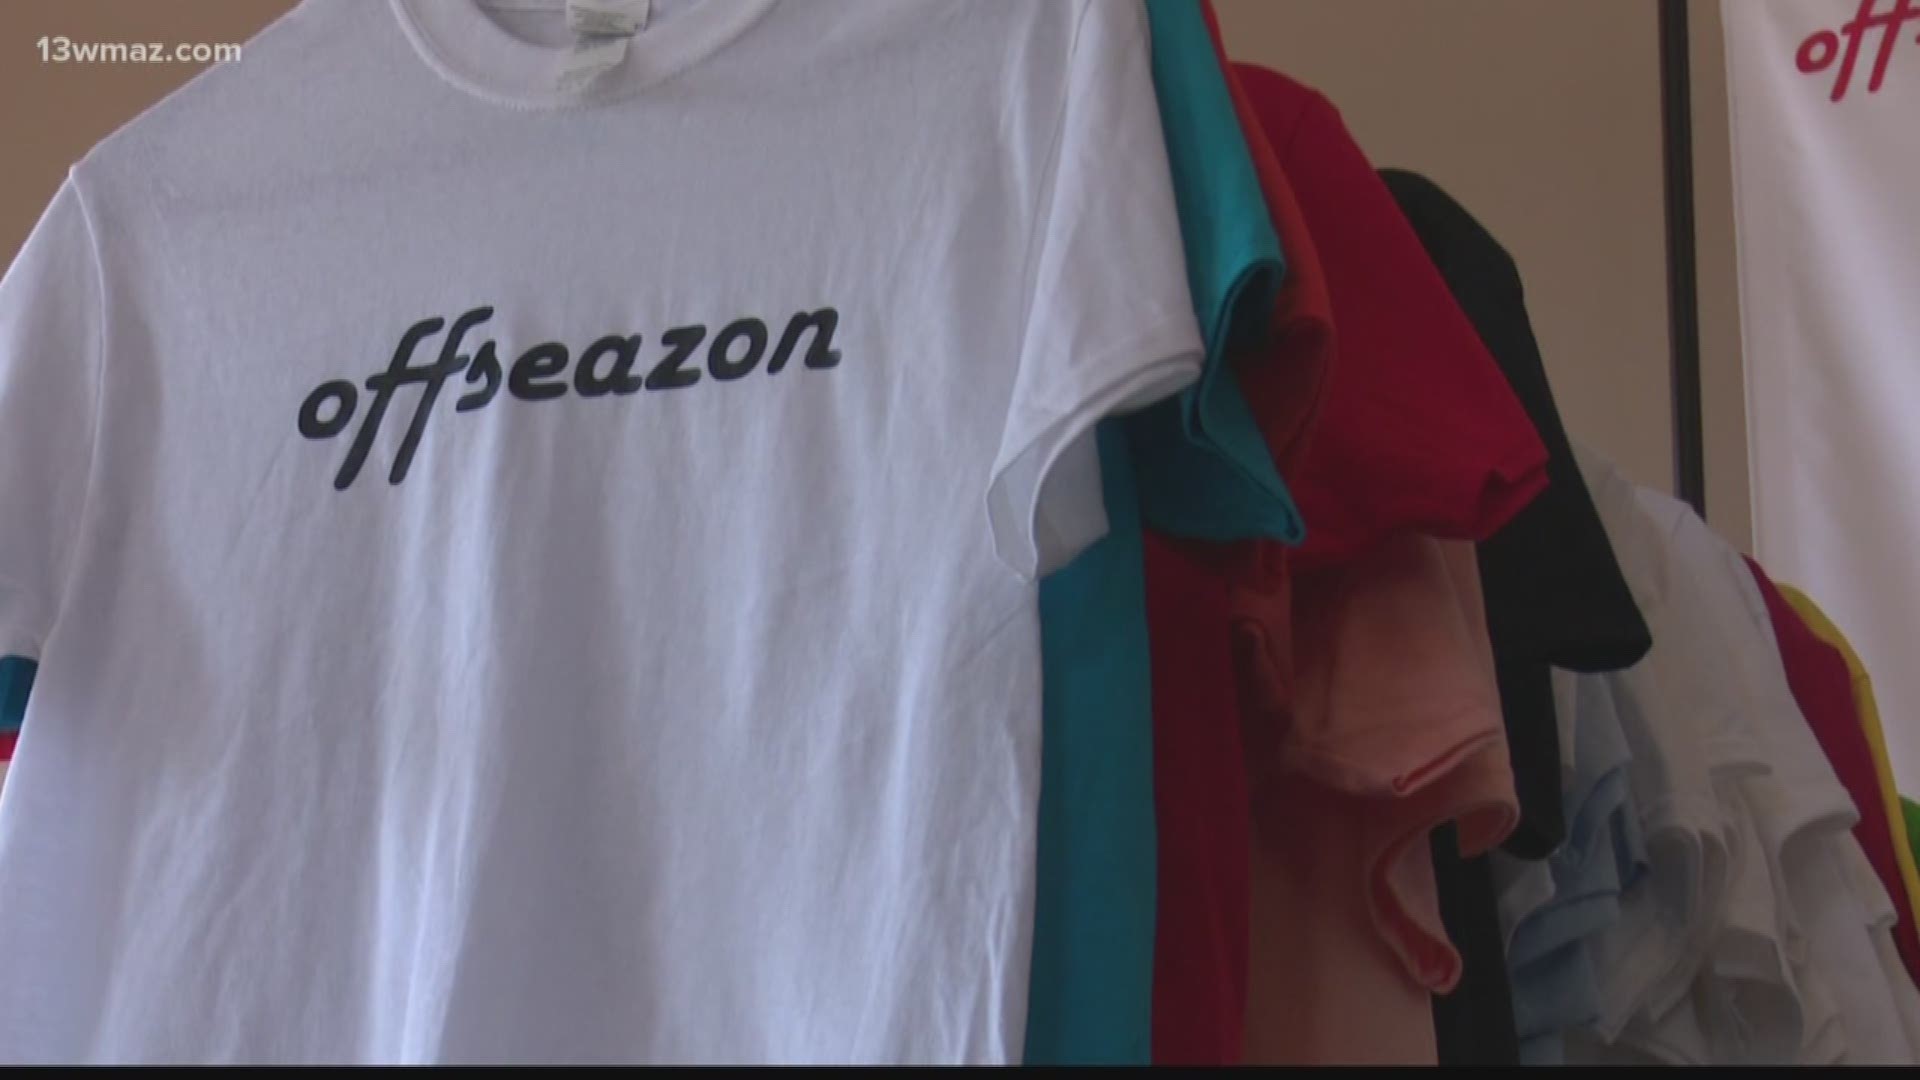 18-year-old Kyler Ross is opening his own storefront in Sandersville for his clothing brand, Offseazon. He hopes to motivate people with a positive mindset.